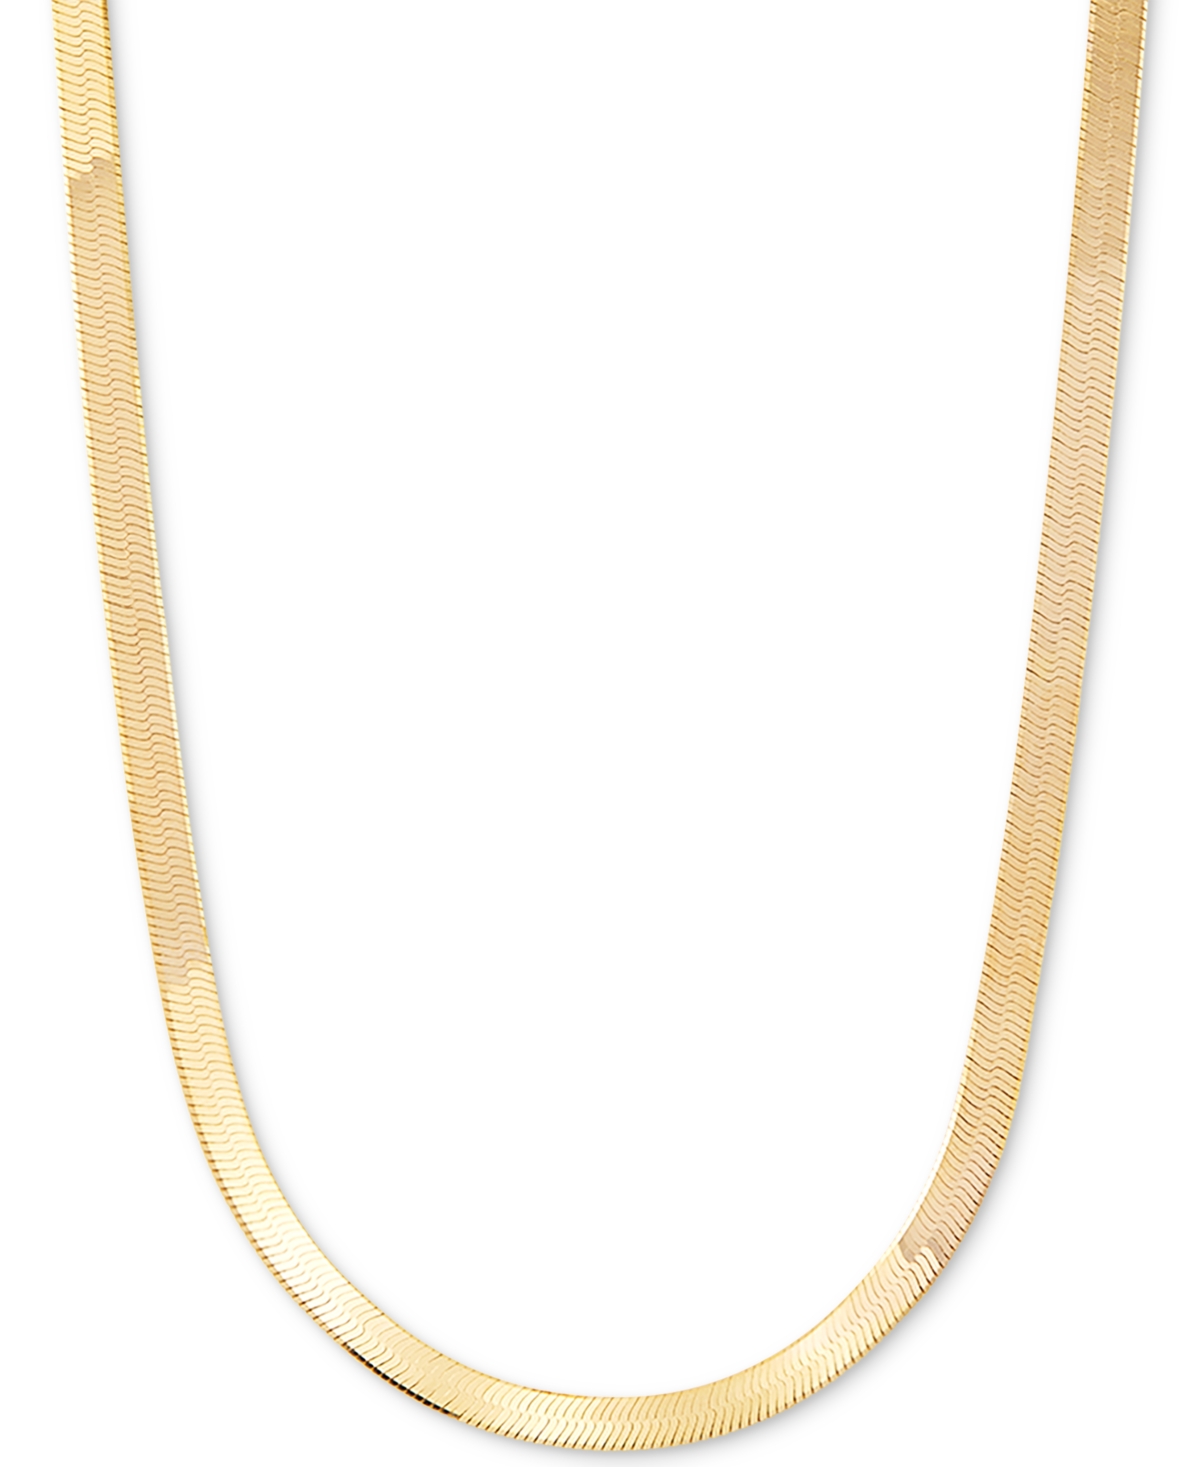 Herringbone 18" Chain Necklace (4.5mm) in 18k Gold-Plated Sterling Silver - Gold Over Silver